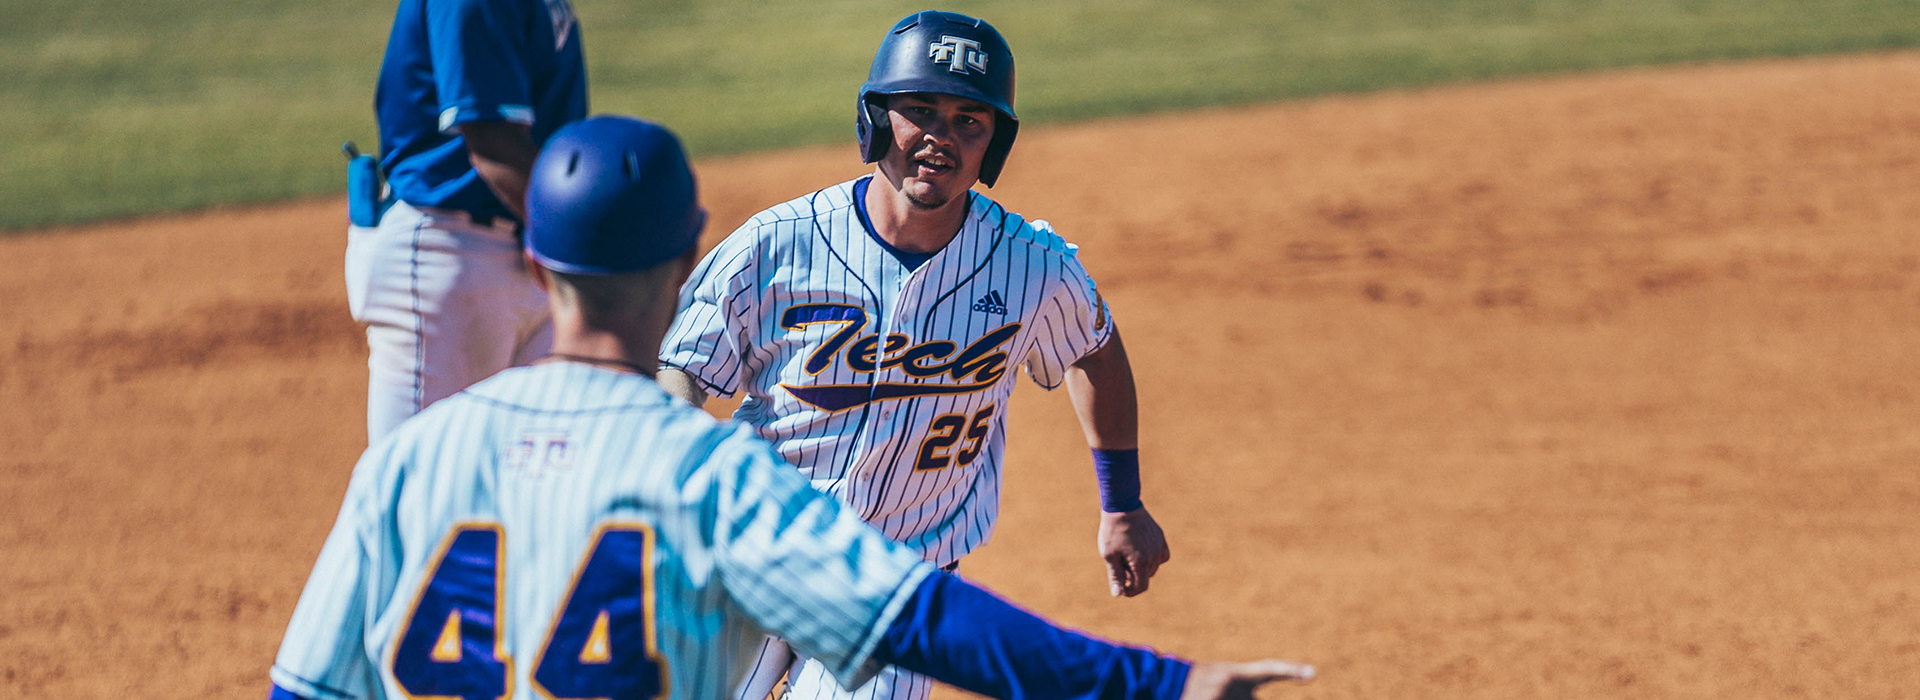 Tech baseball back at home to host Eastern Illinois